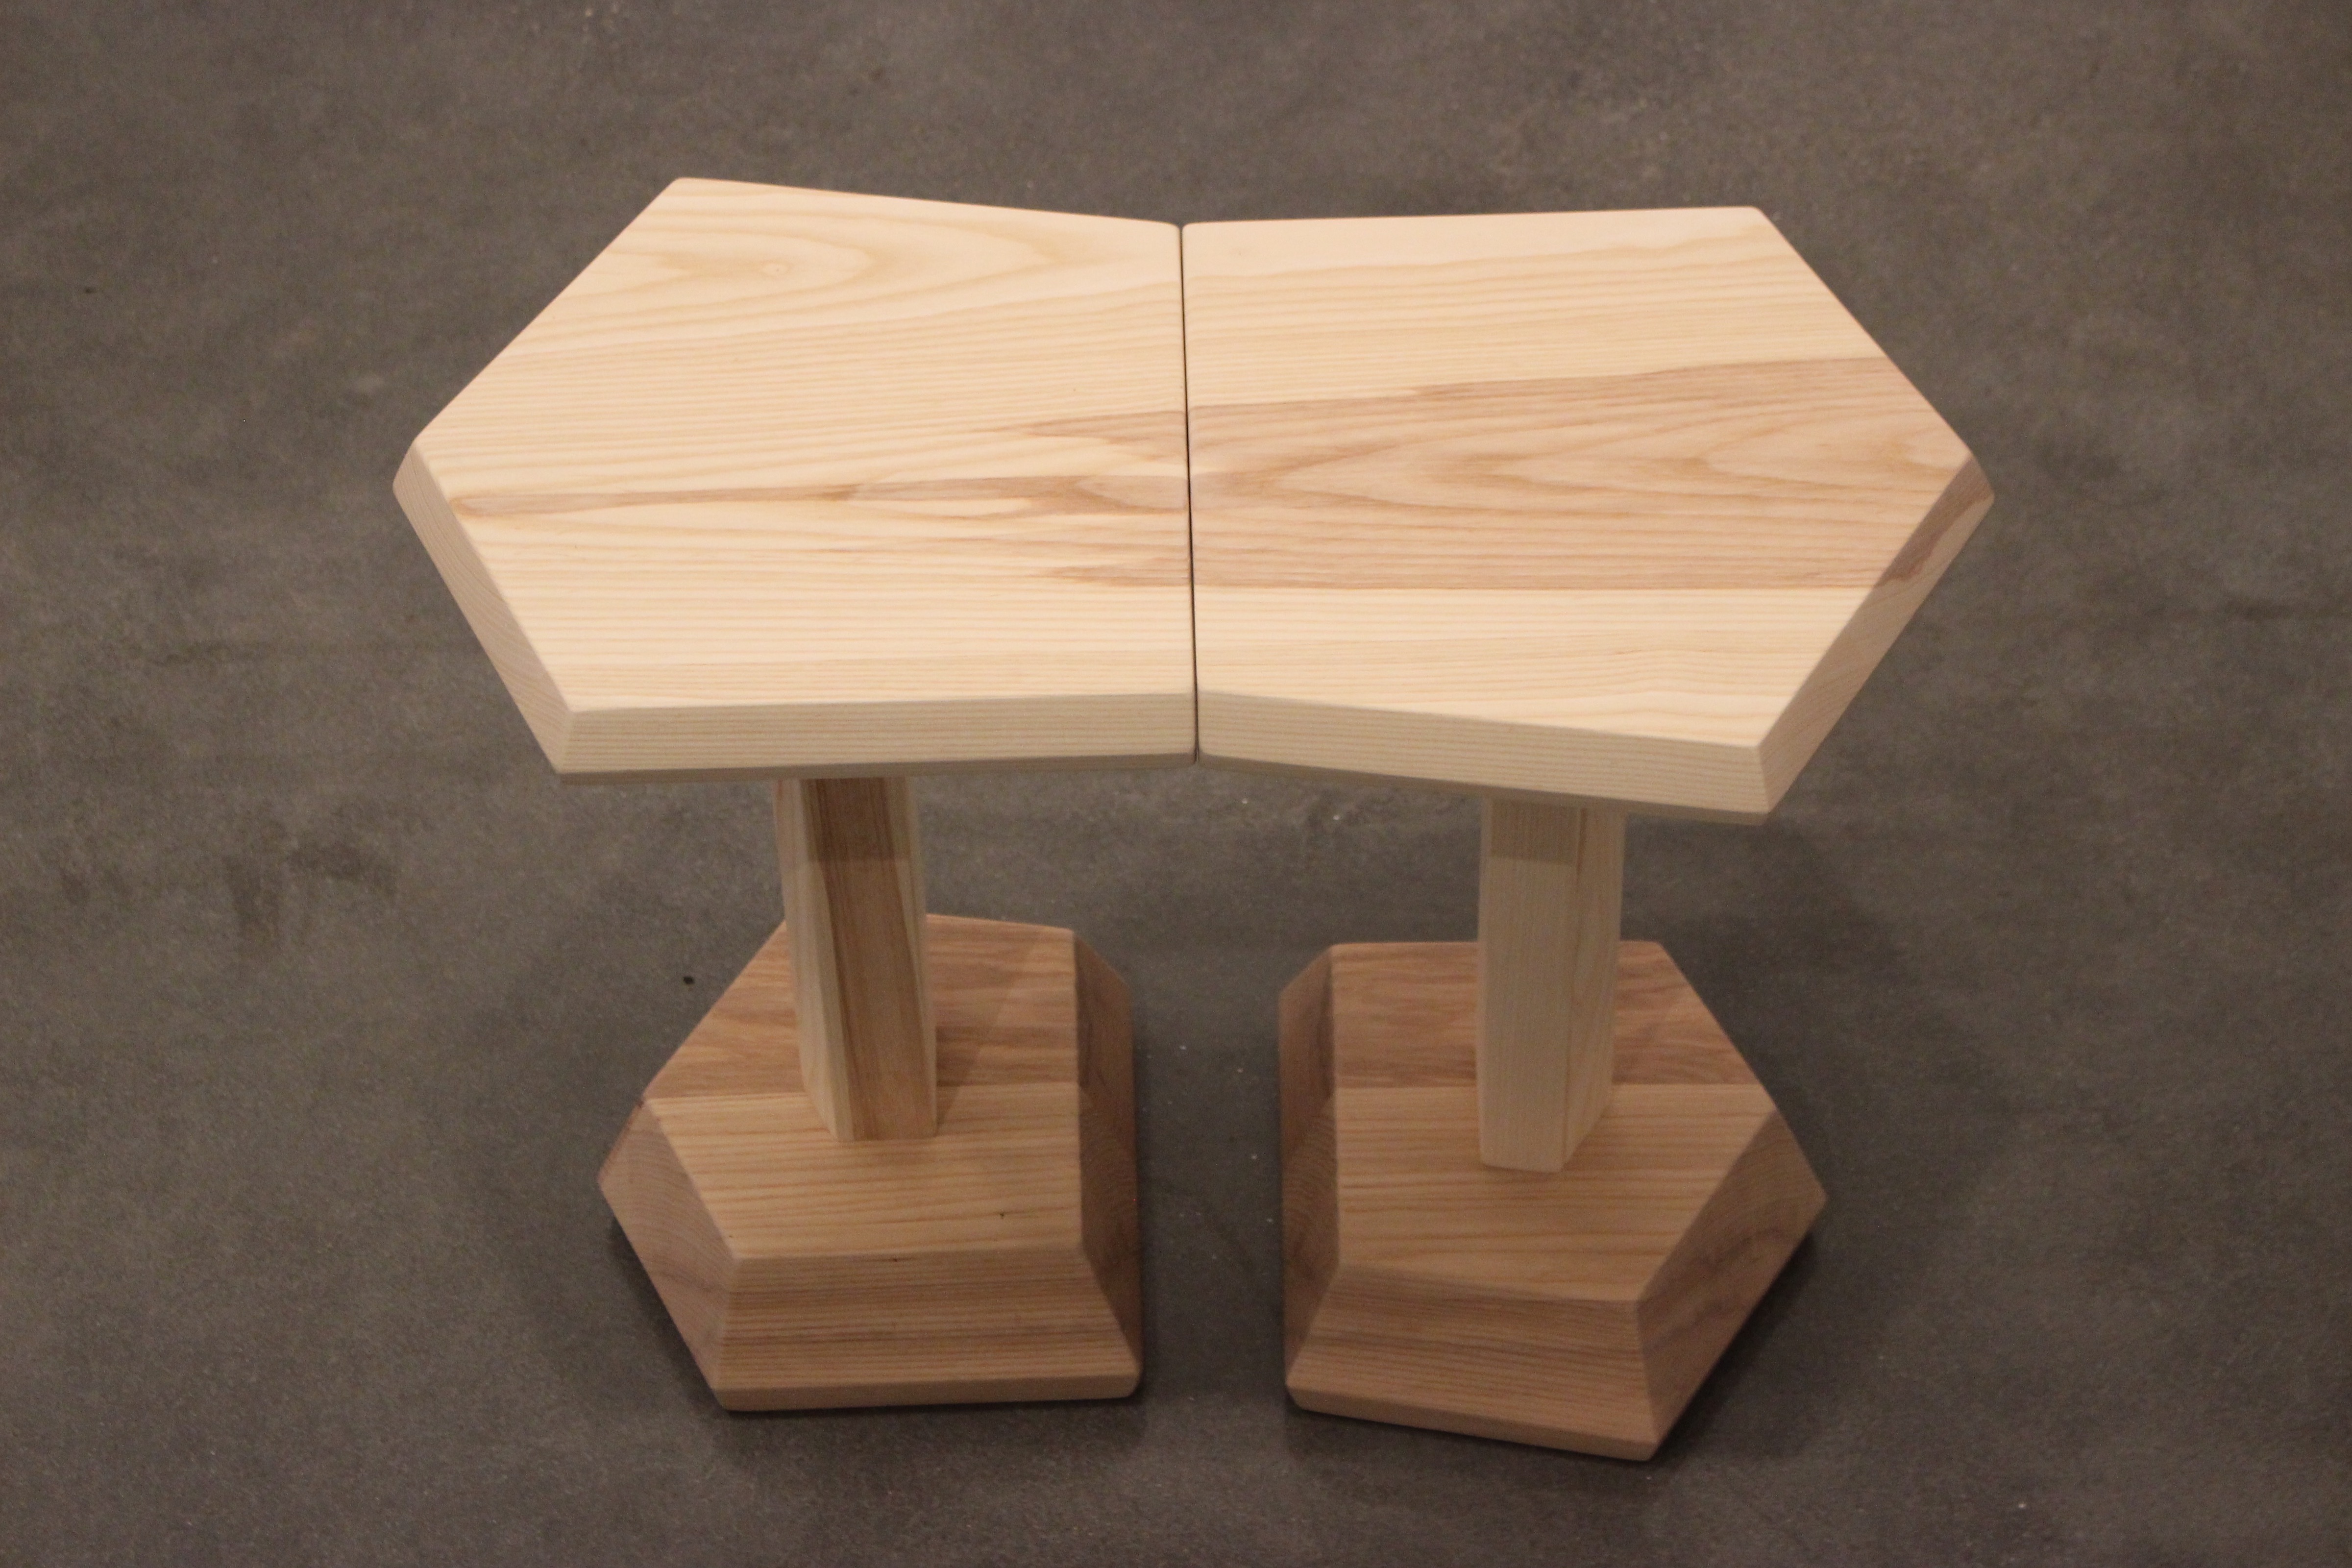 Knotz Side Tables